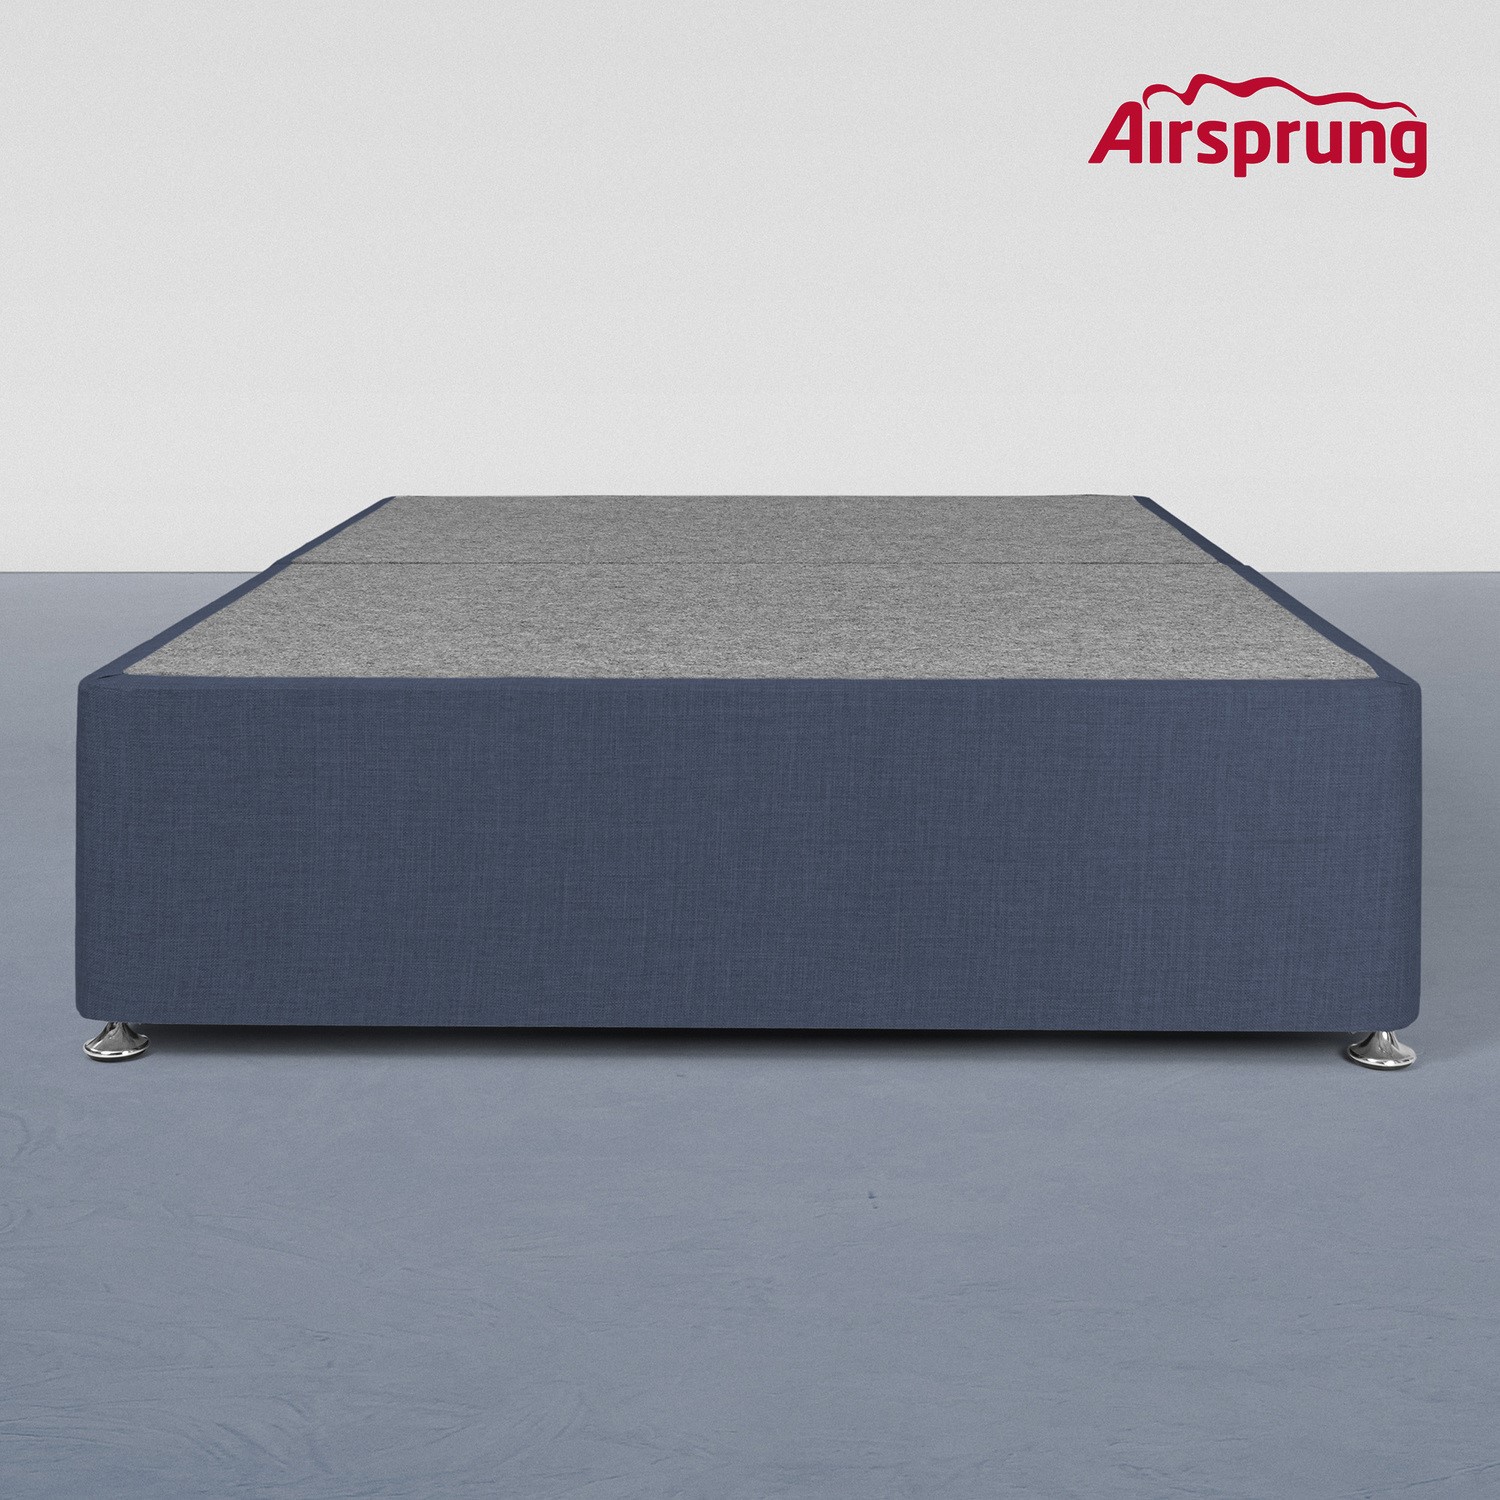 Read more about Airsprung kelston double 4 drawer divan midnight blue